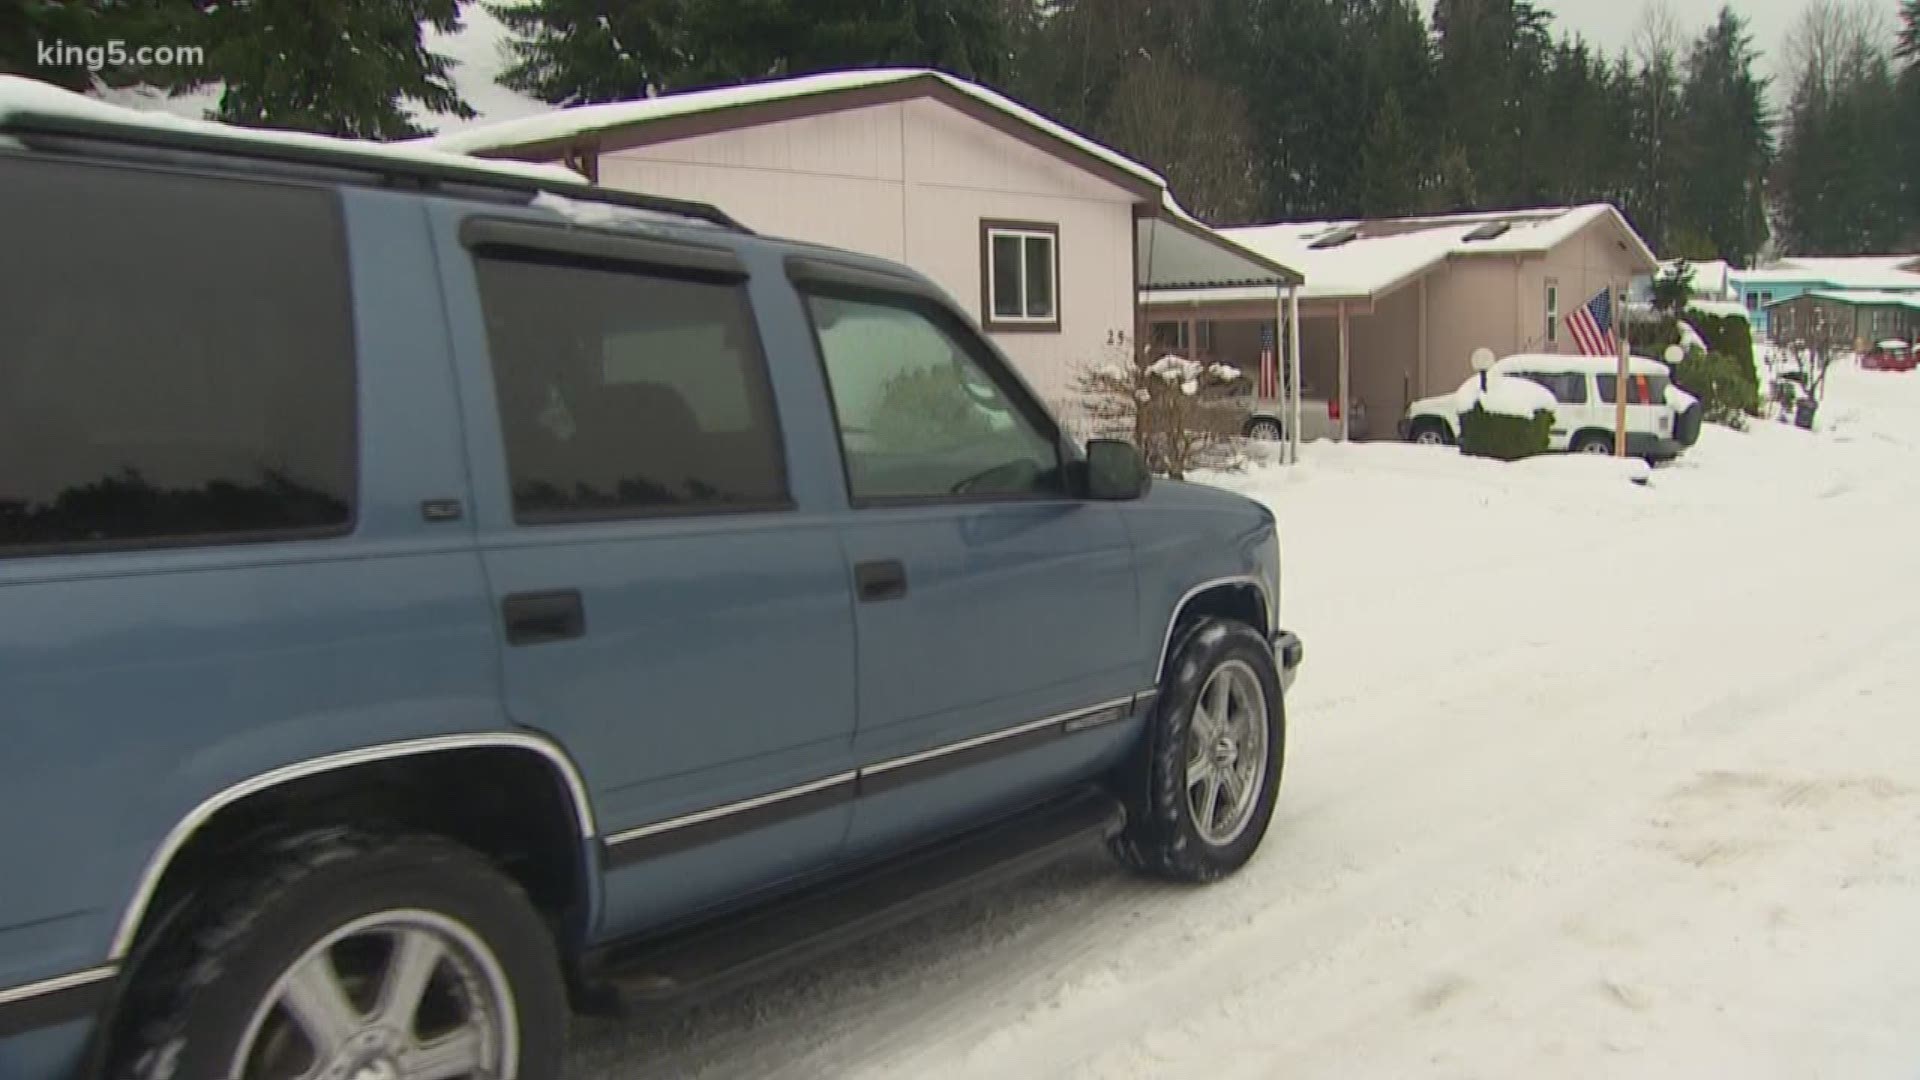 Some seniors stranded by snow in a mobile home park are asking for help. Their car ports are collapsing and some roads are still too slick to drive on. KING 5's Eric Wilkinson was live in Everett with their plea.